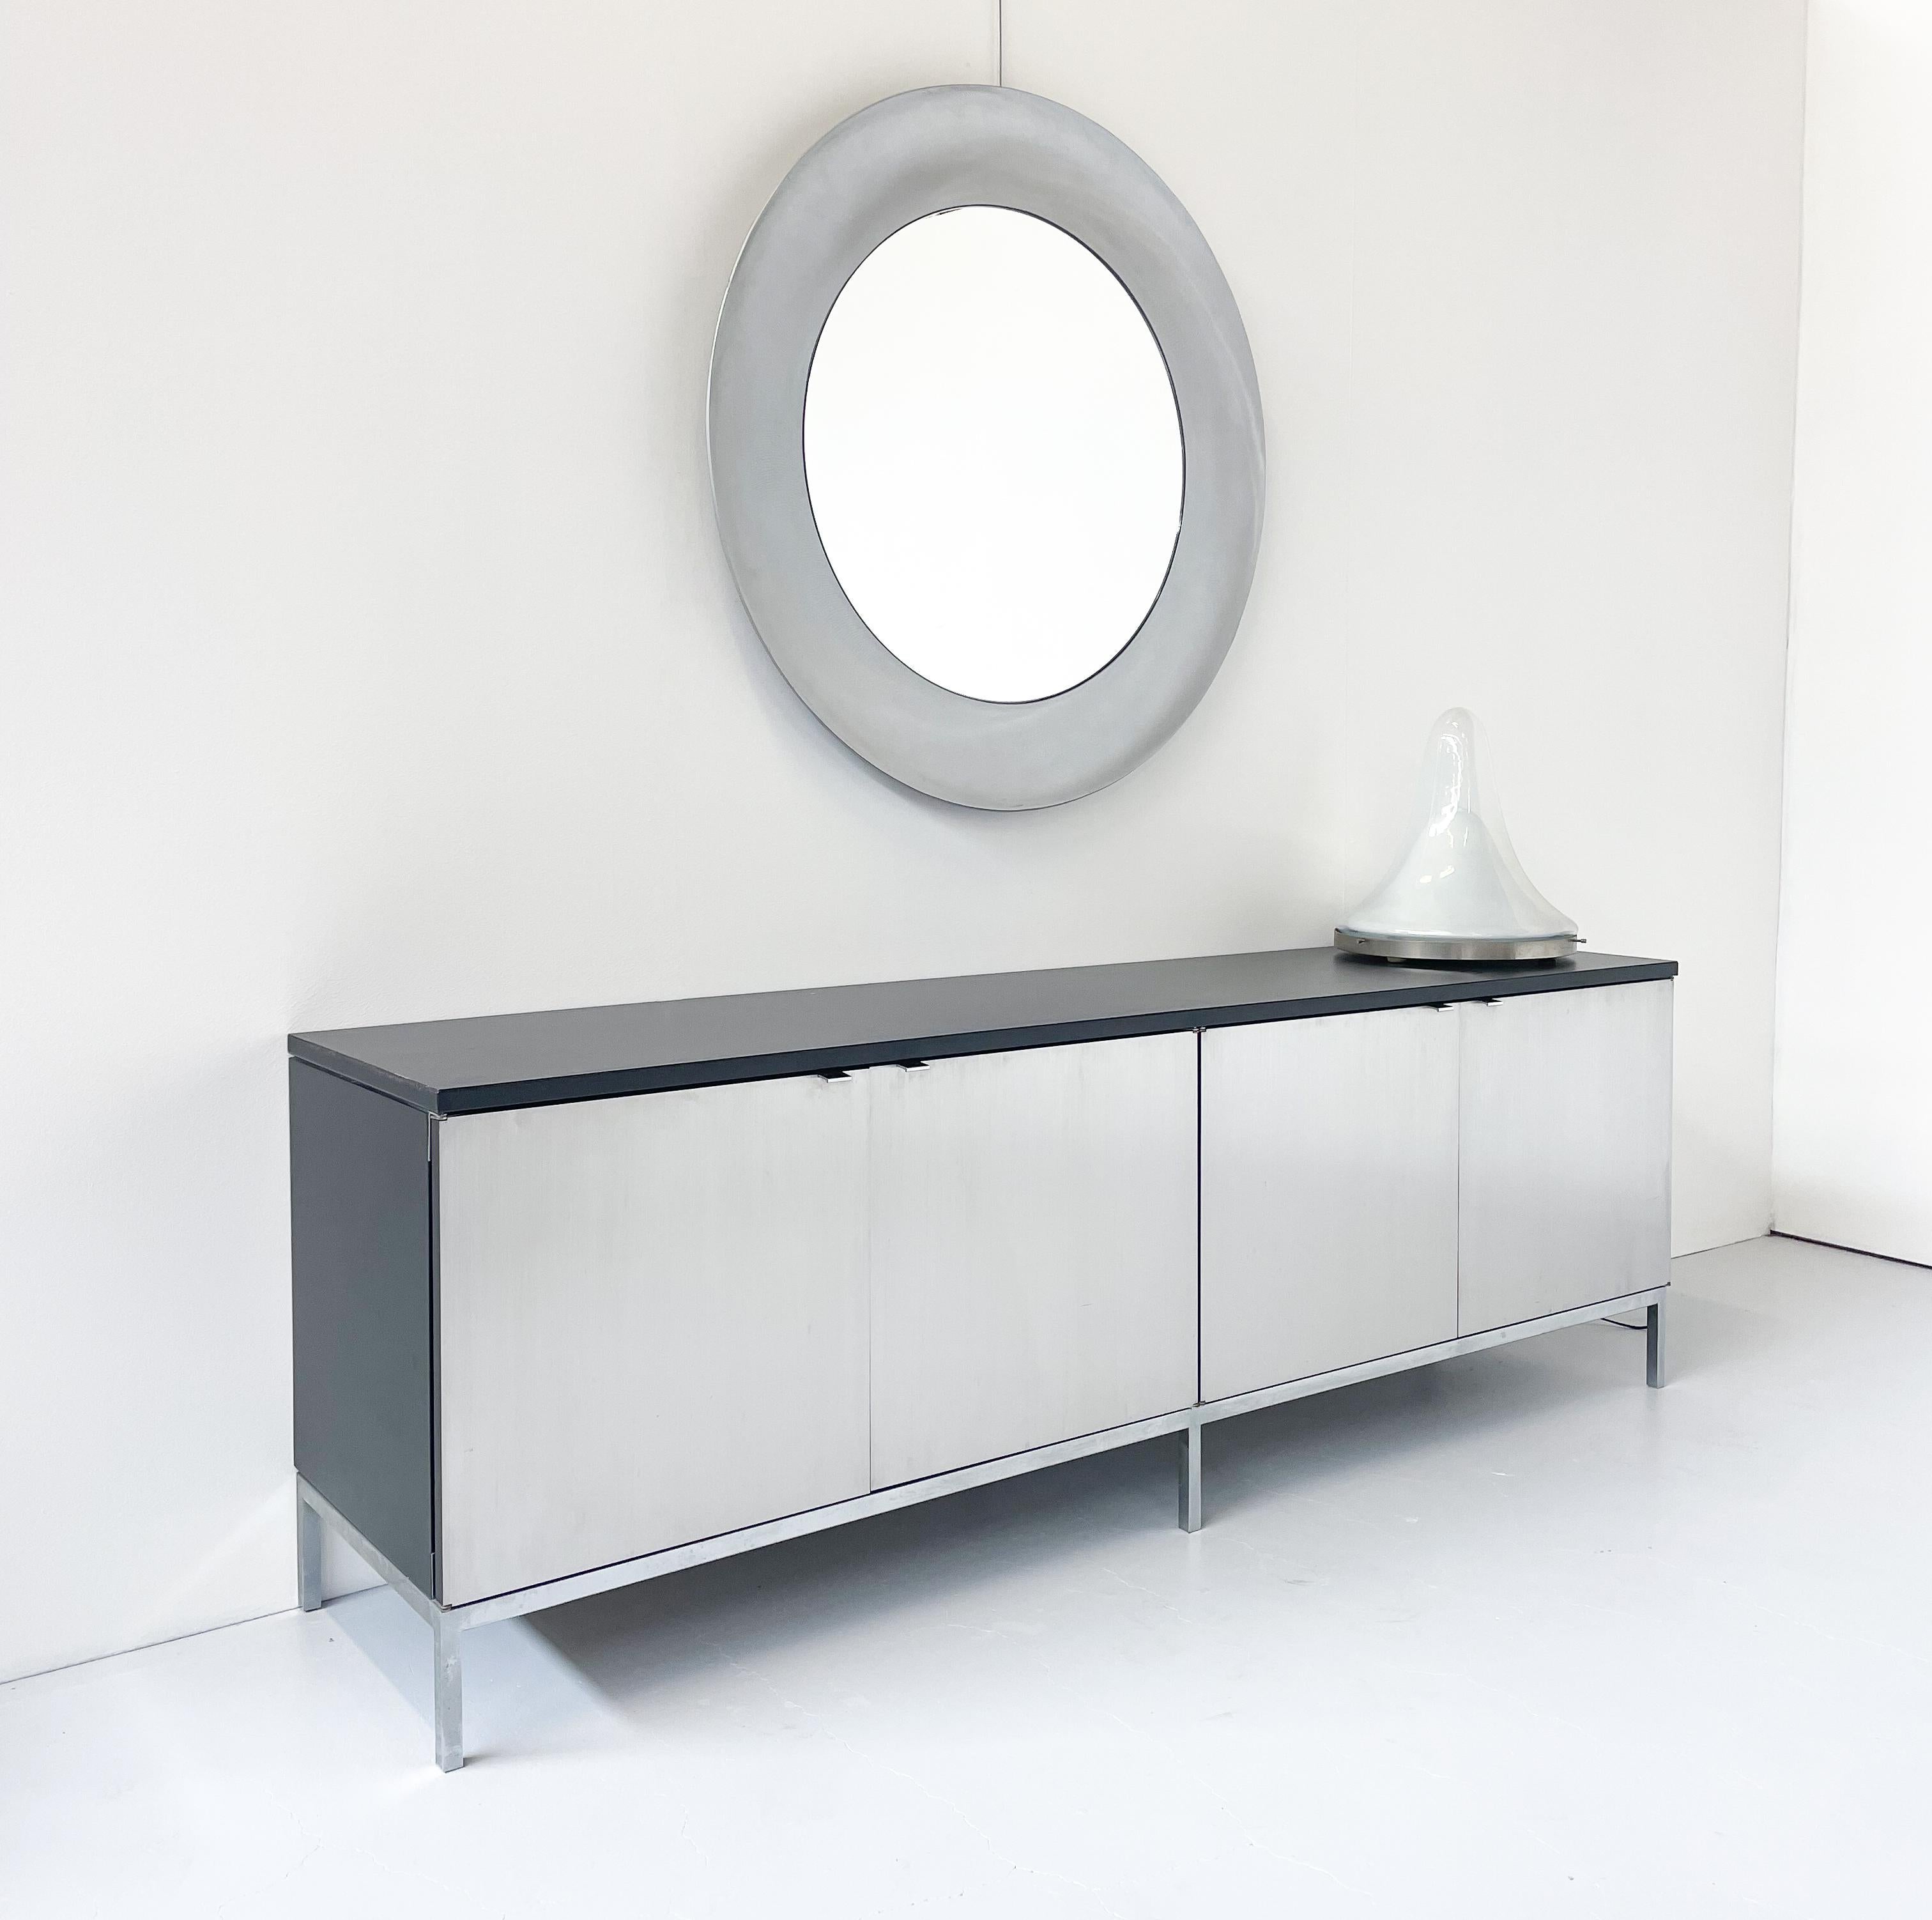 Mid-Century Modern Florence Knoll Sideboard, Aluminium and Wood, 1960s For Sale 8